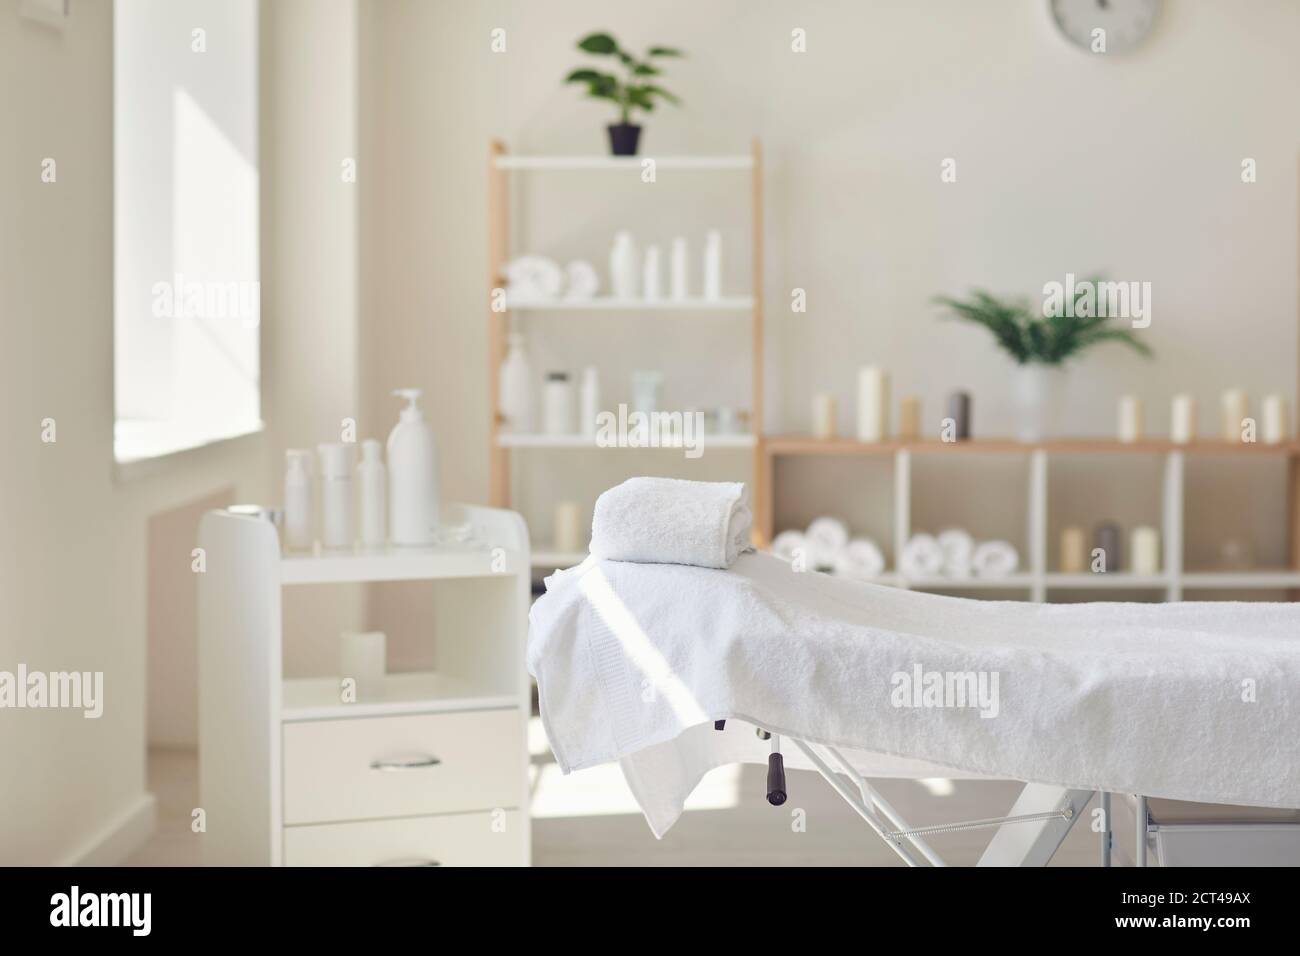 Interior of newly opened modern massage salon with all the necessary supplies ready Stock Photo